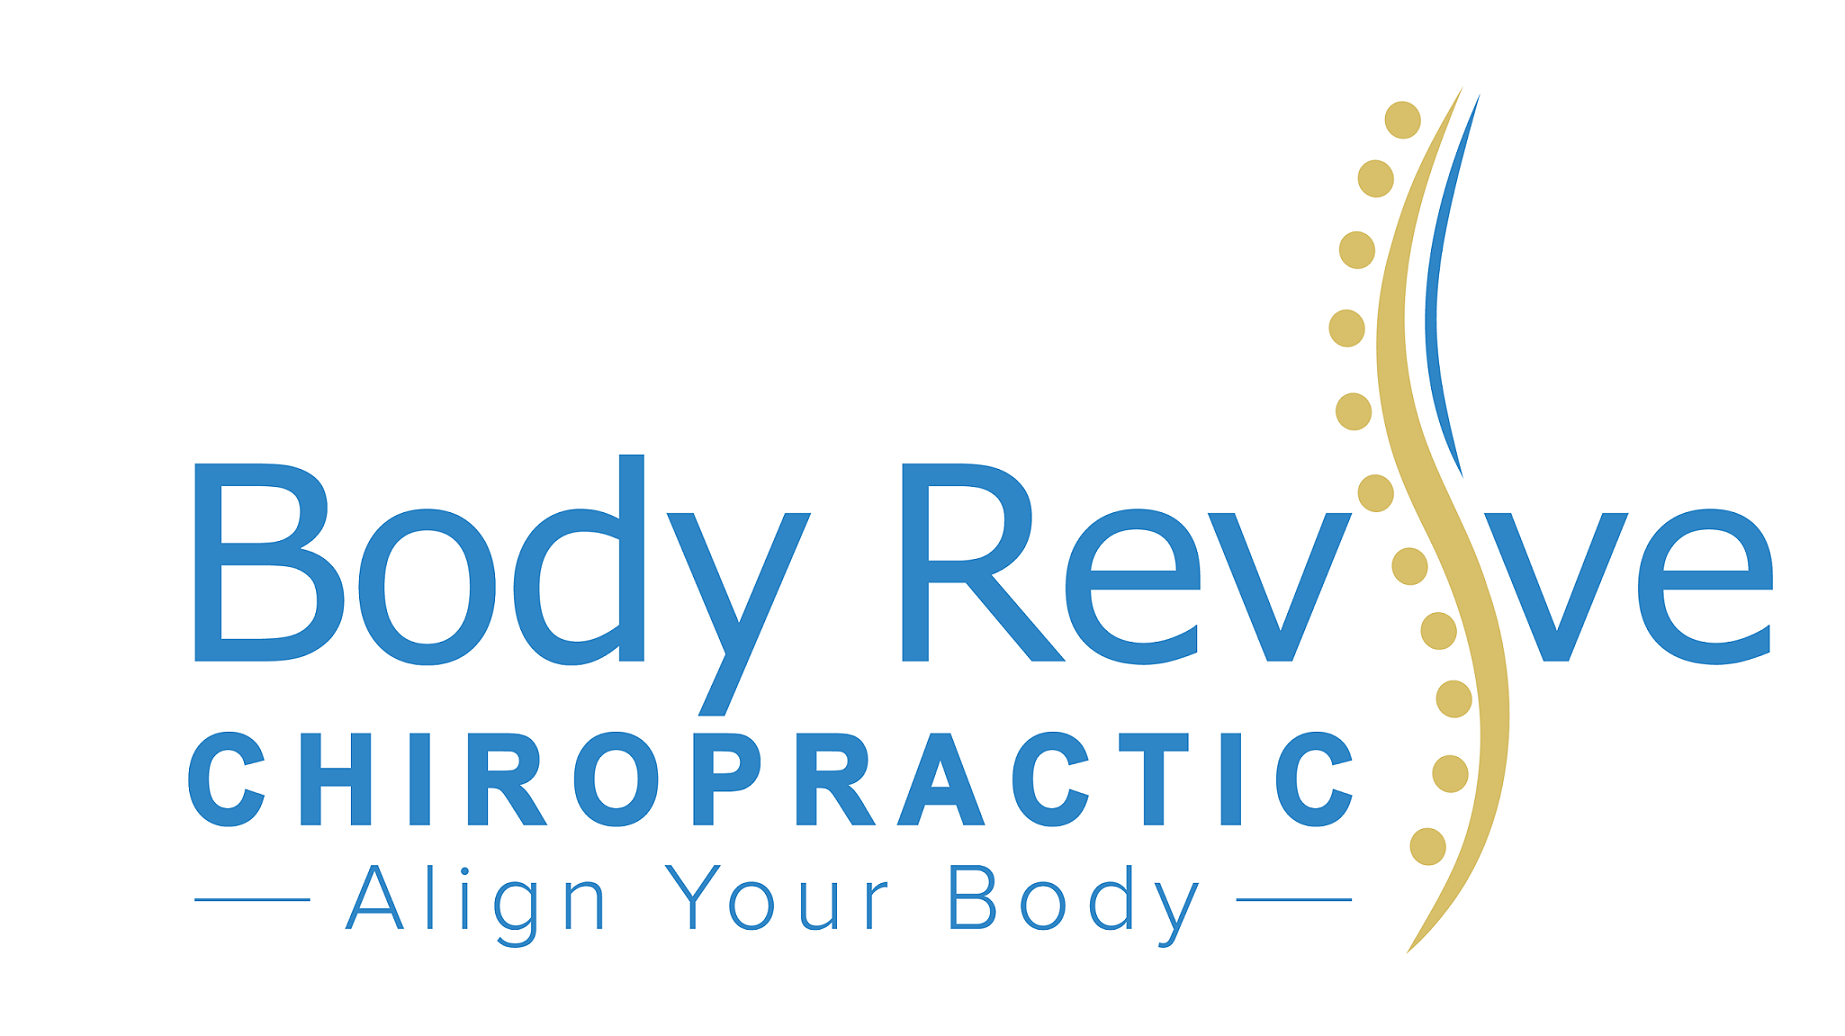 Body Revive Chiropractic logo - Home